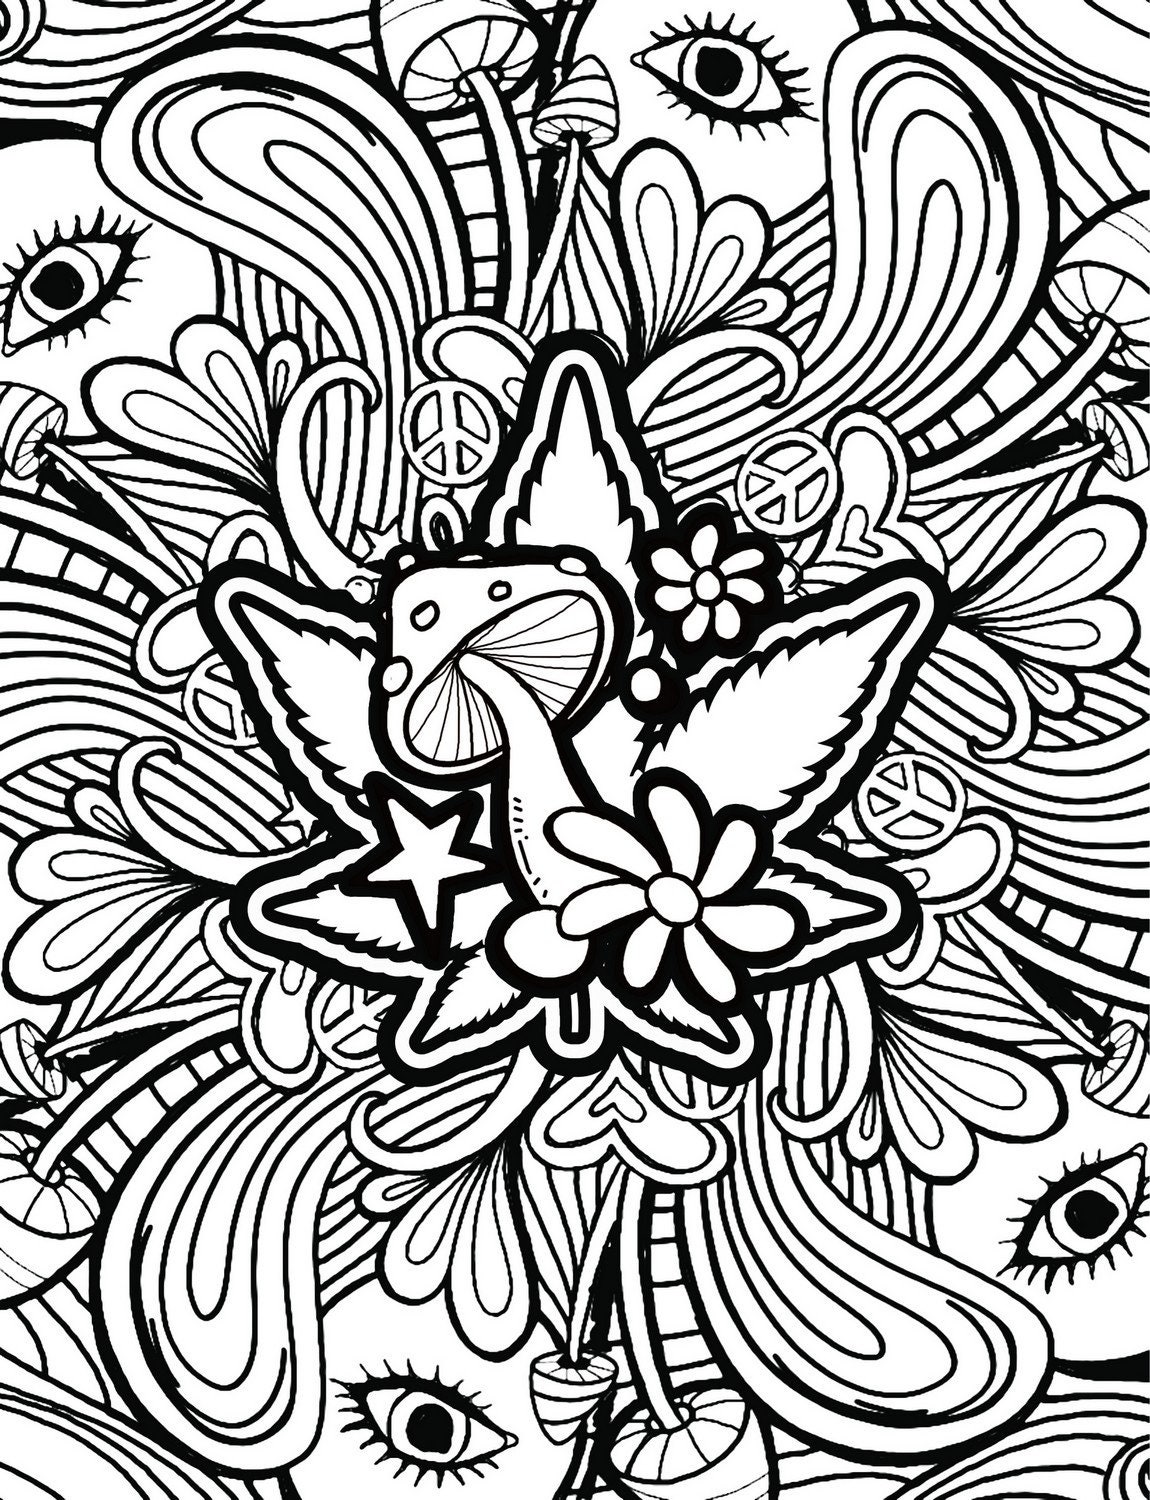 Stoner Coloring Book For Adults: Stoner Gift For Men & Women- The Funny  Psychedelic Coloring Book With 30 Trippy Marijuana Themed Coloring Pages  (Paperback)